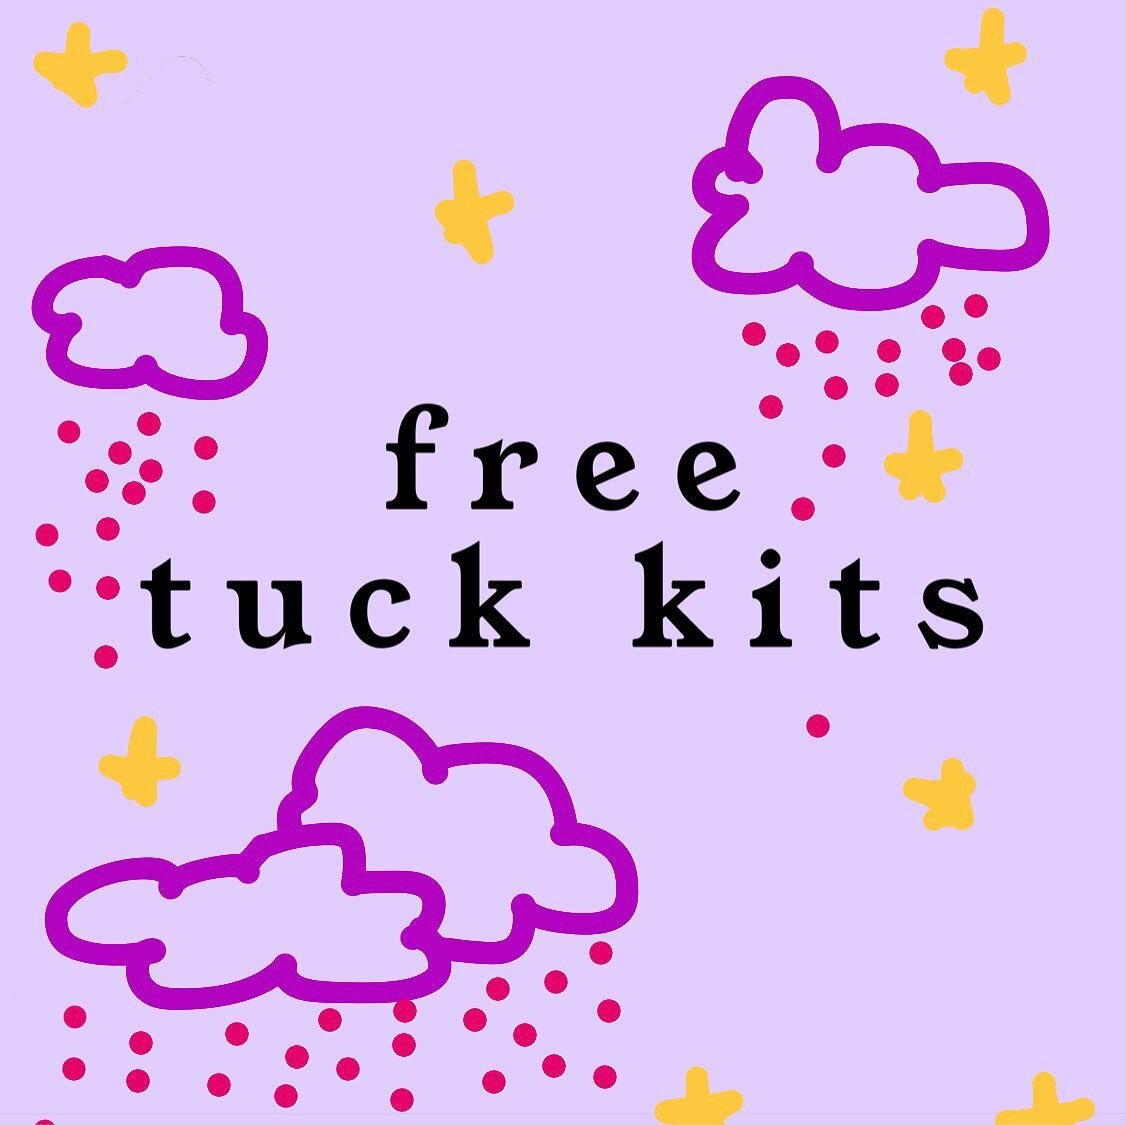 Thanks to the kindness and generosity of community members, we reached enough money this Pride Month to purchase + ship 3 Unclockable swim- and gym-proof 7-use tuck kits to LGBTQIA2S+ Pittsburghers! If you would like a kit, just DM us and we can work